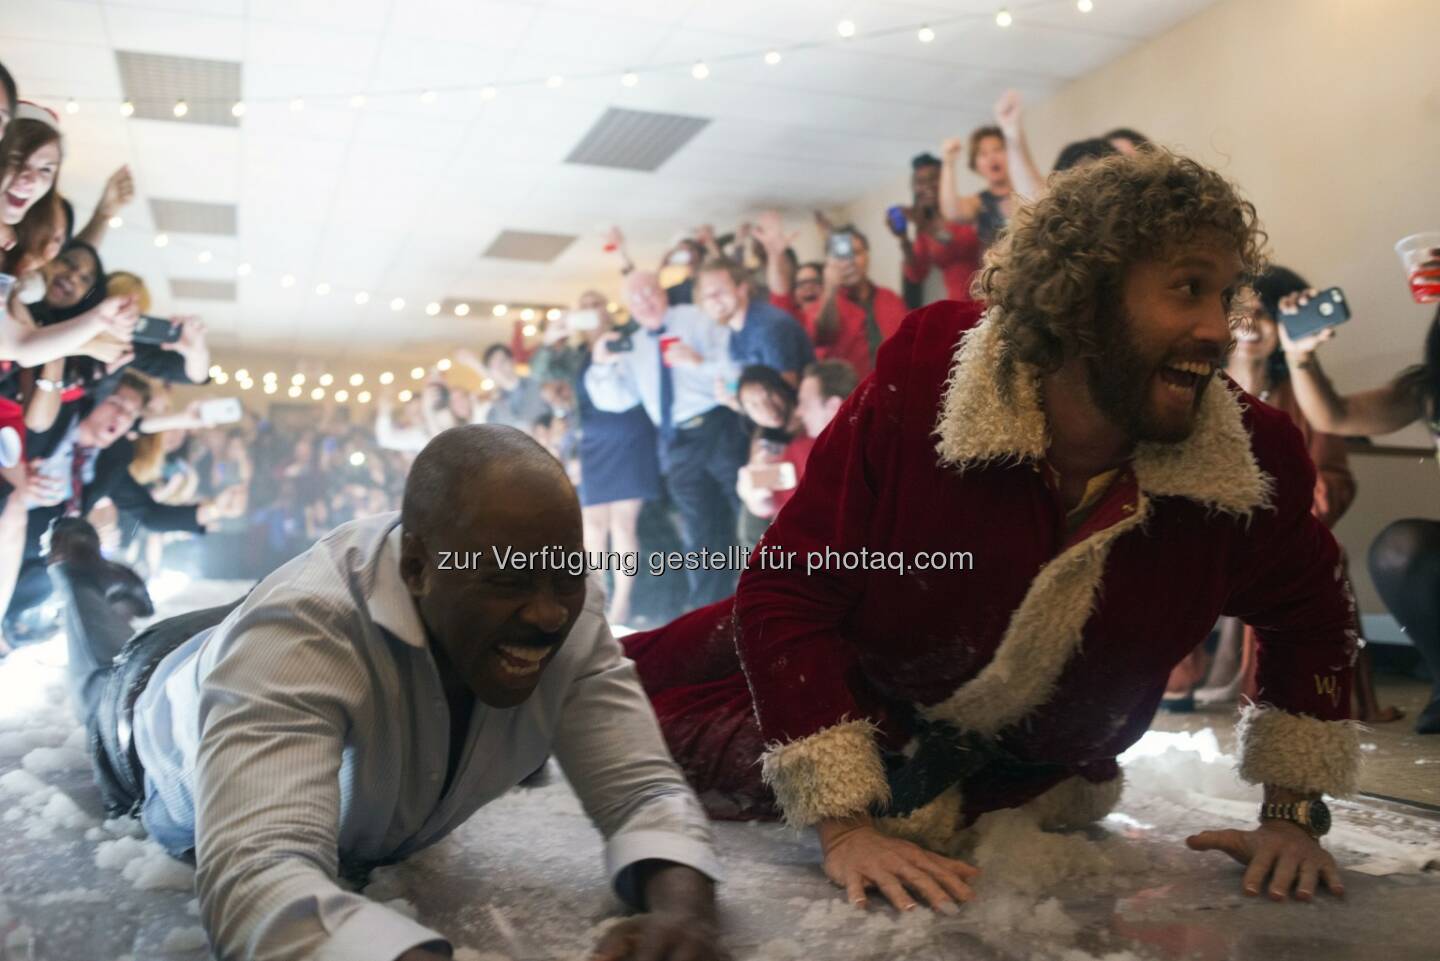 Courtney B. Vance (als Walter), T.J. Miller (als Clay Vanstone) in „Office Christmas Party“ : Weihnachtskomödie - by Paramount Pictures, DreamWorks Pictures and Reliance Entertainment – ab 8. Dezember in den Kinos : Fotocredit: obs/Constantin Film/Photo Credit: Glen Wilson